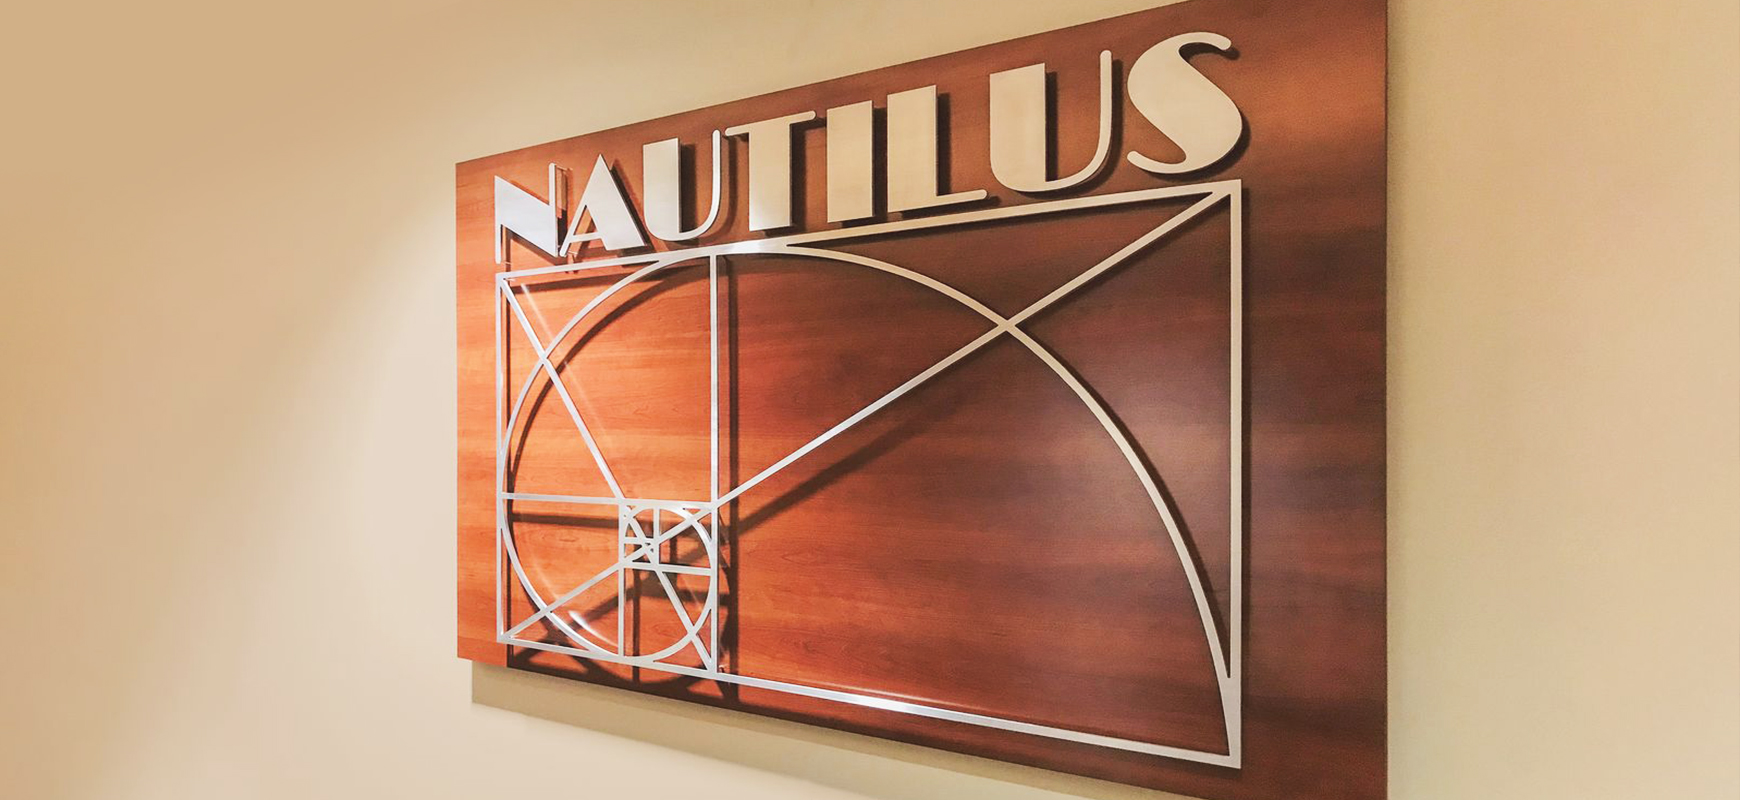 Nautilus wooden sign displaying the company name on a board with a custom decorative element